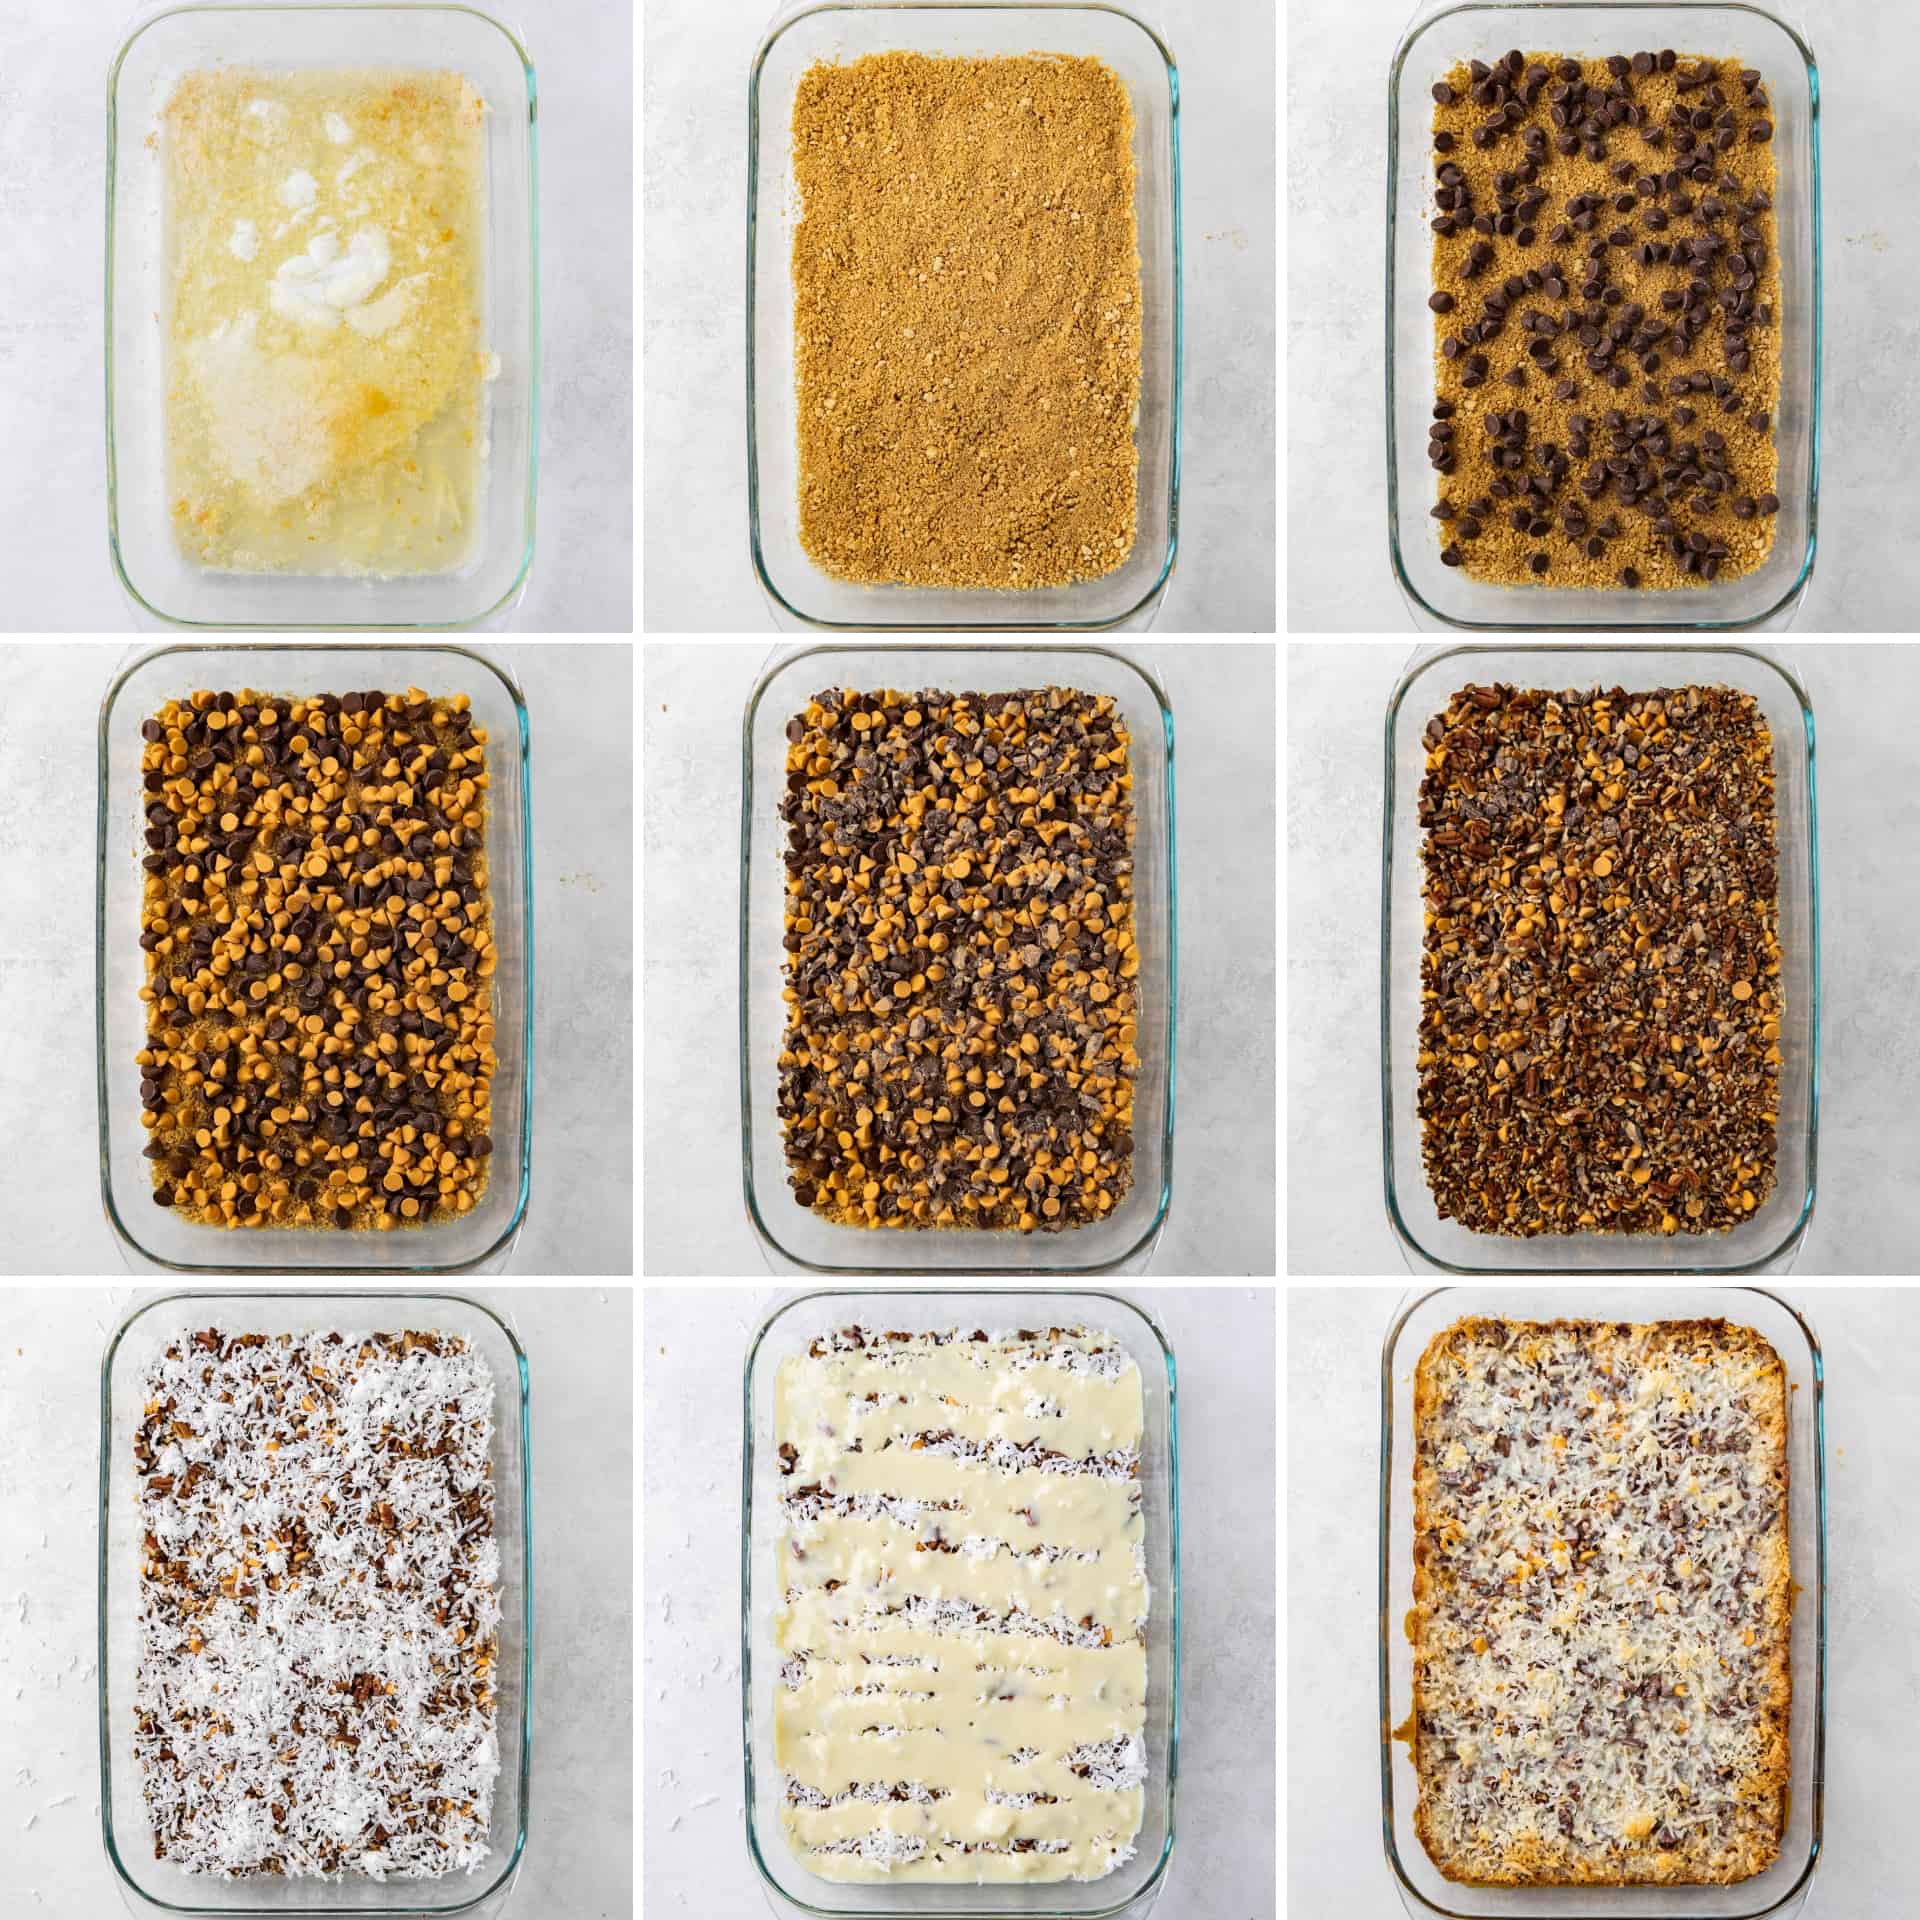 A collage of 9 images showing the process of making and layering all of the ingredients in a 9x13 pan for 7 layer bars.